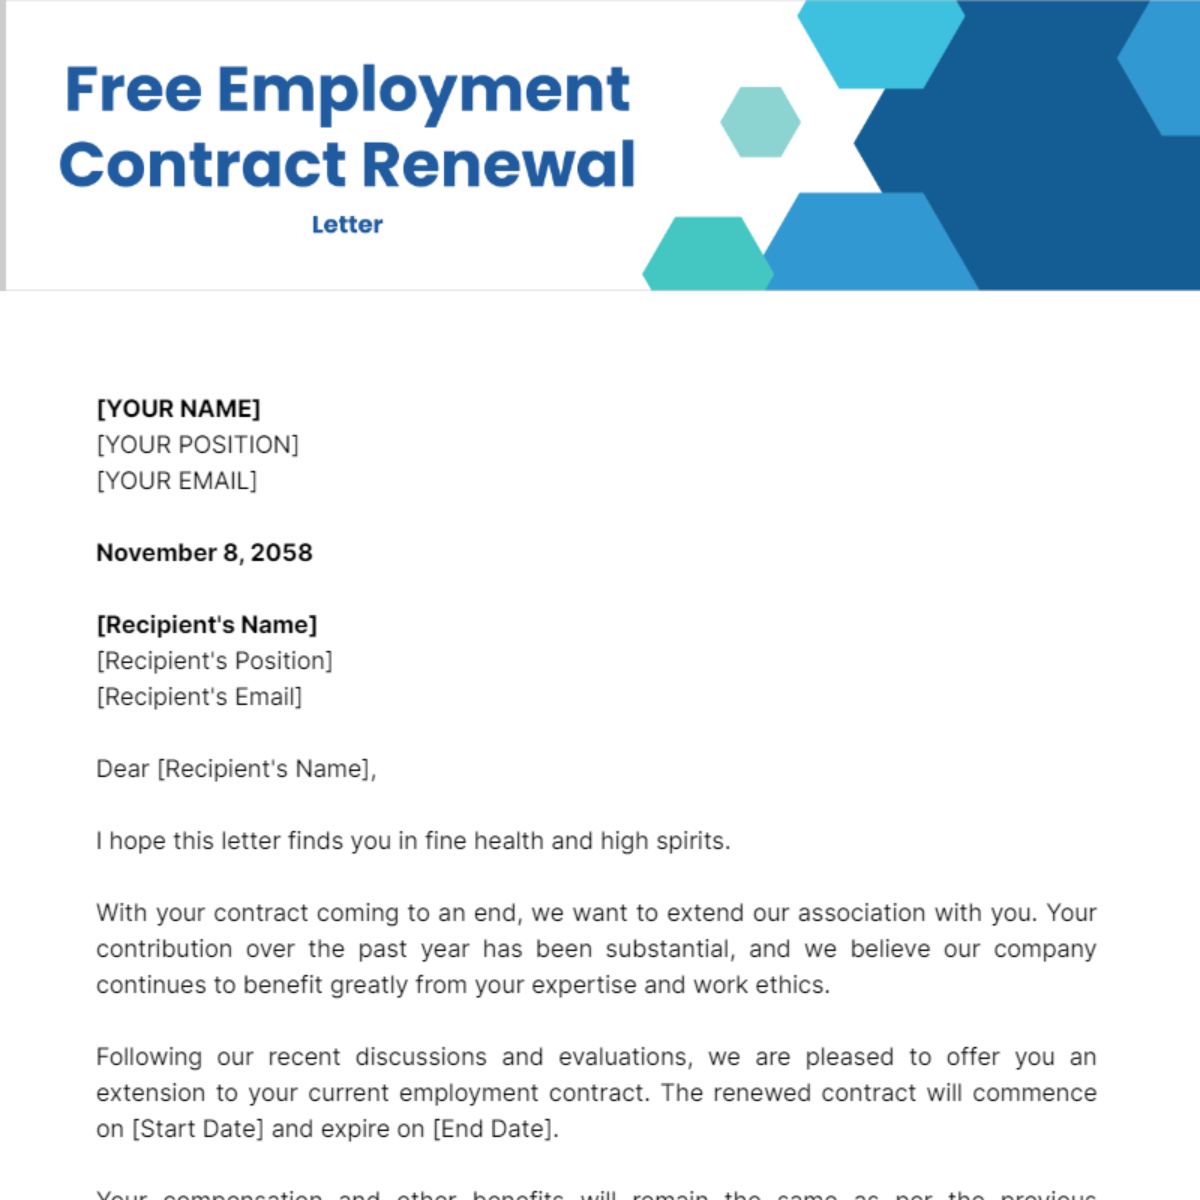 Employment Contract Renewal Letter Template